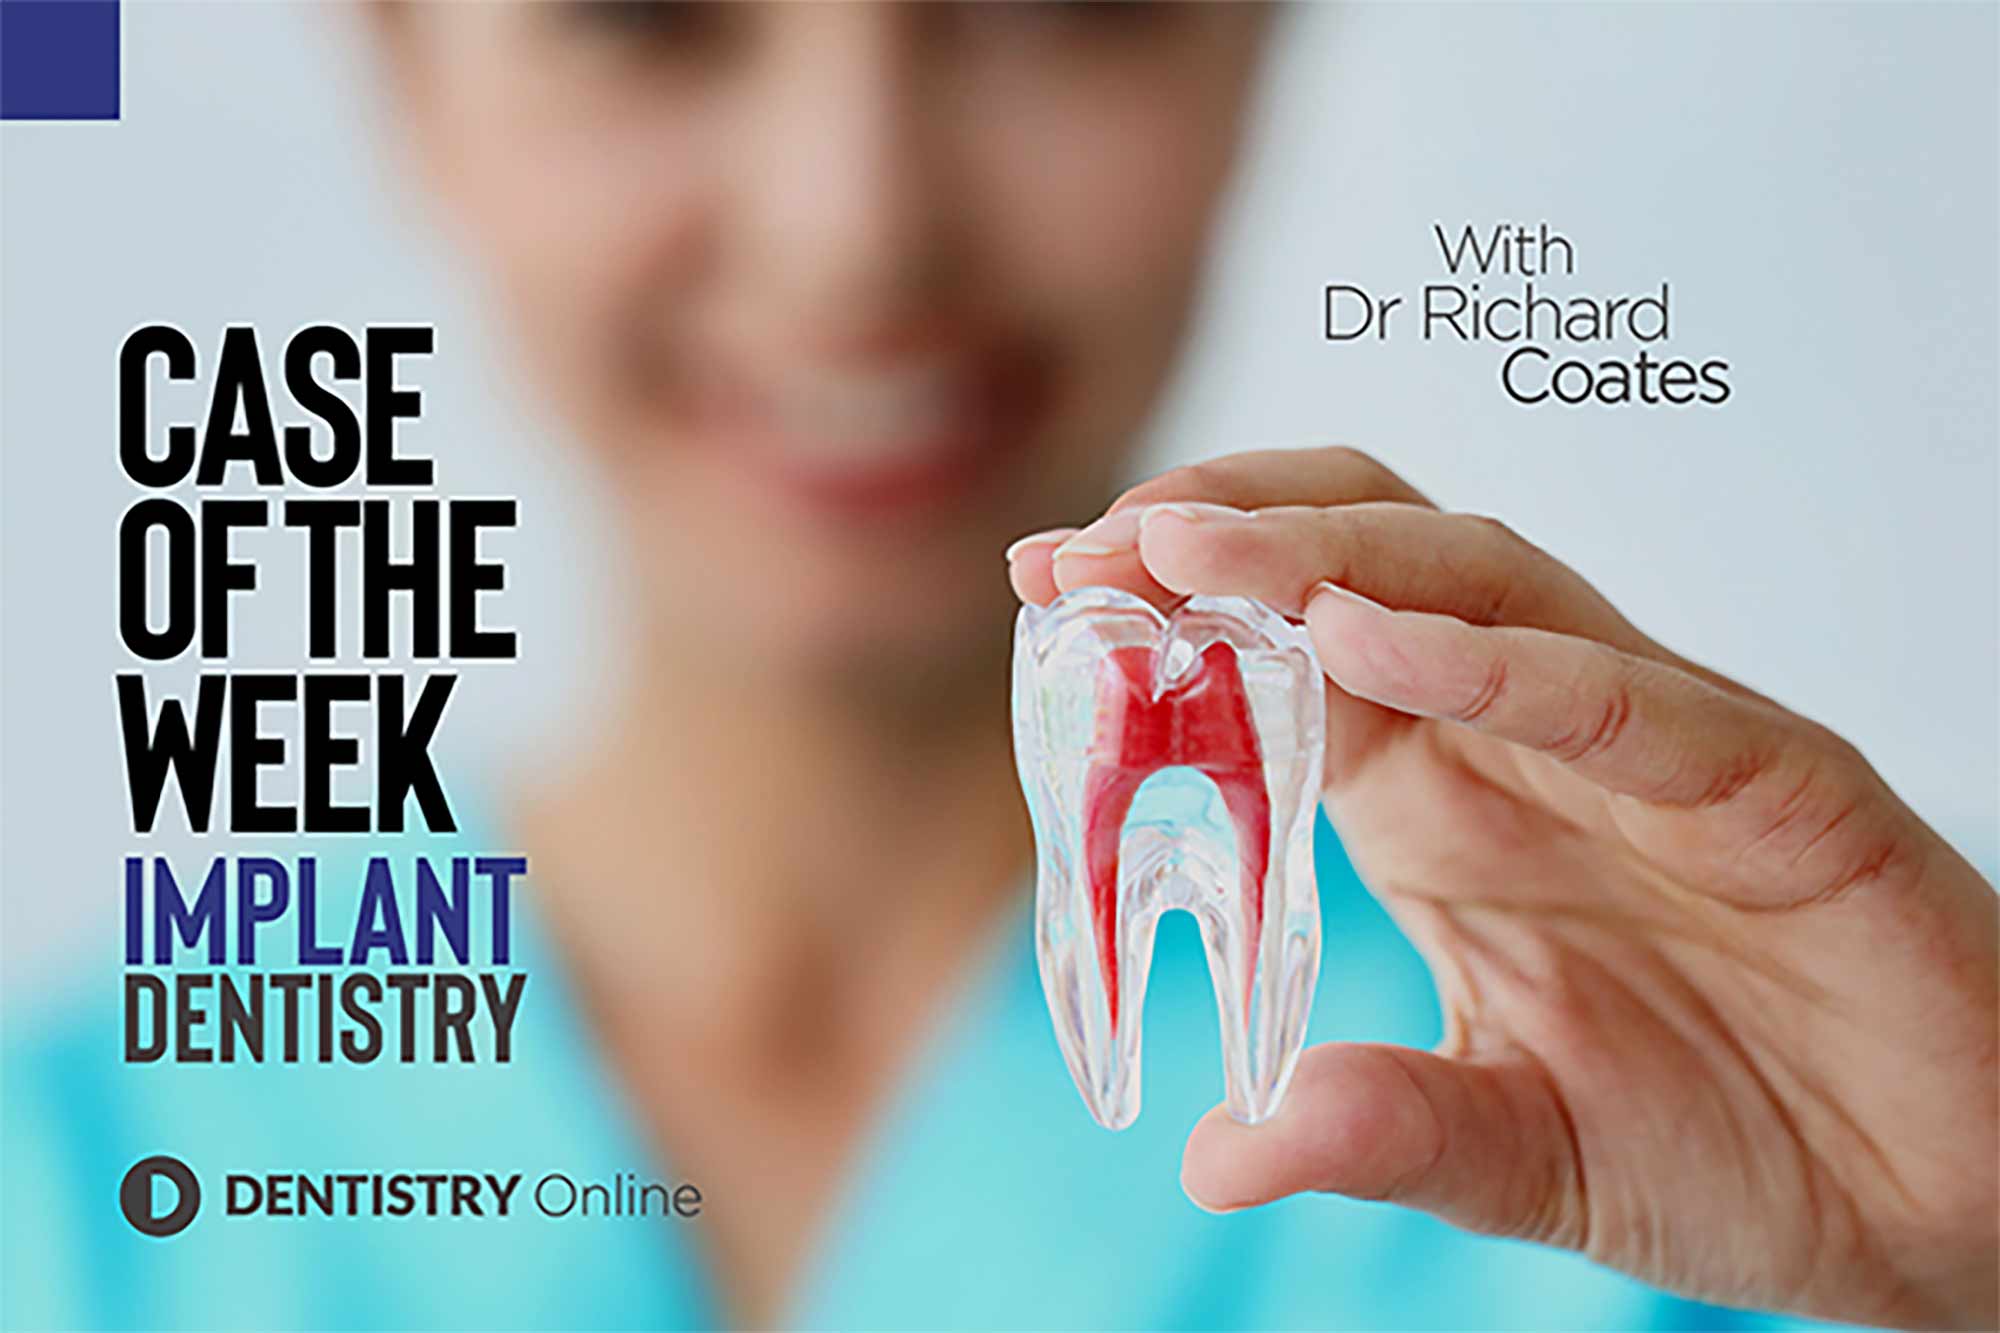 The second in our new 'case of the week' feature sees Richard Coates talk through how he helped a patient regain her smile